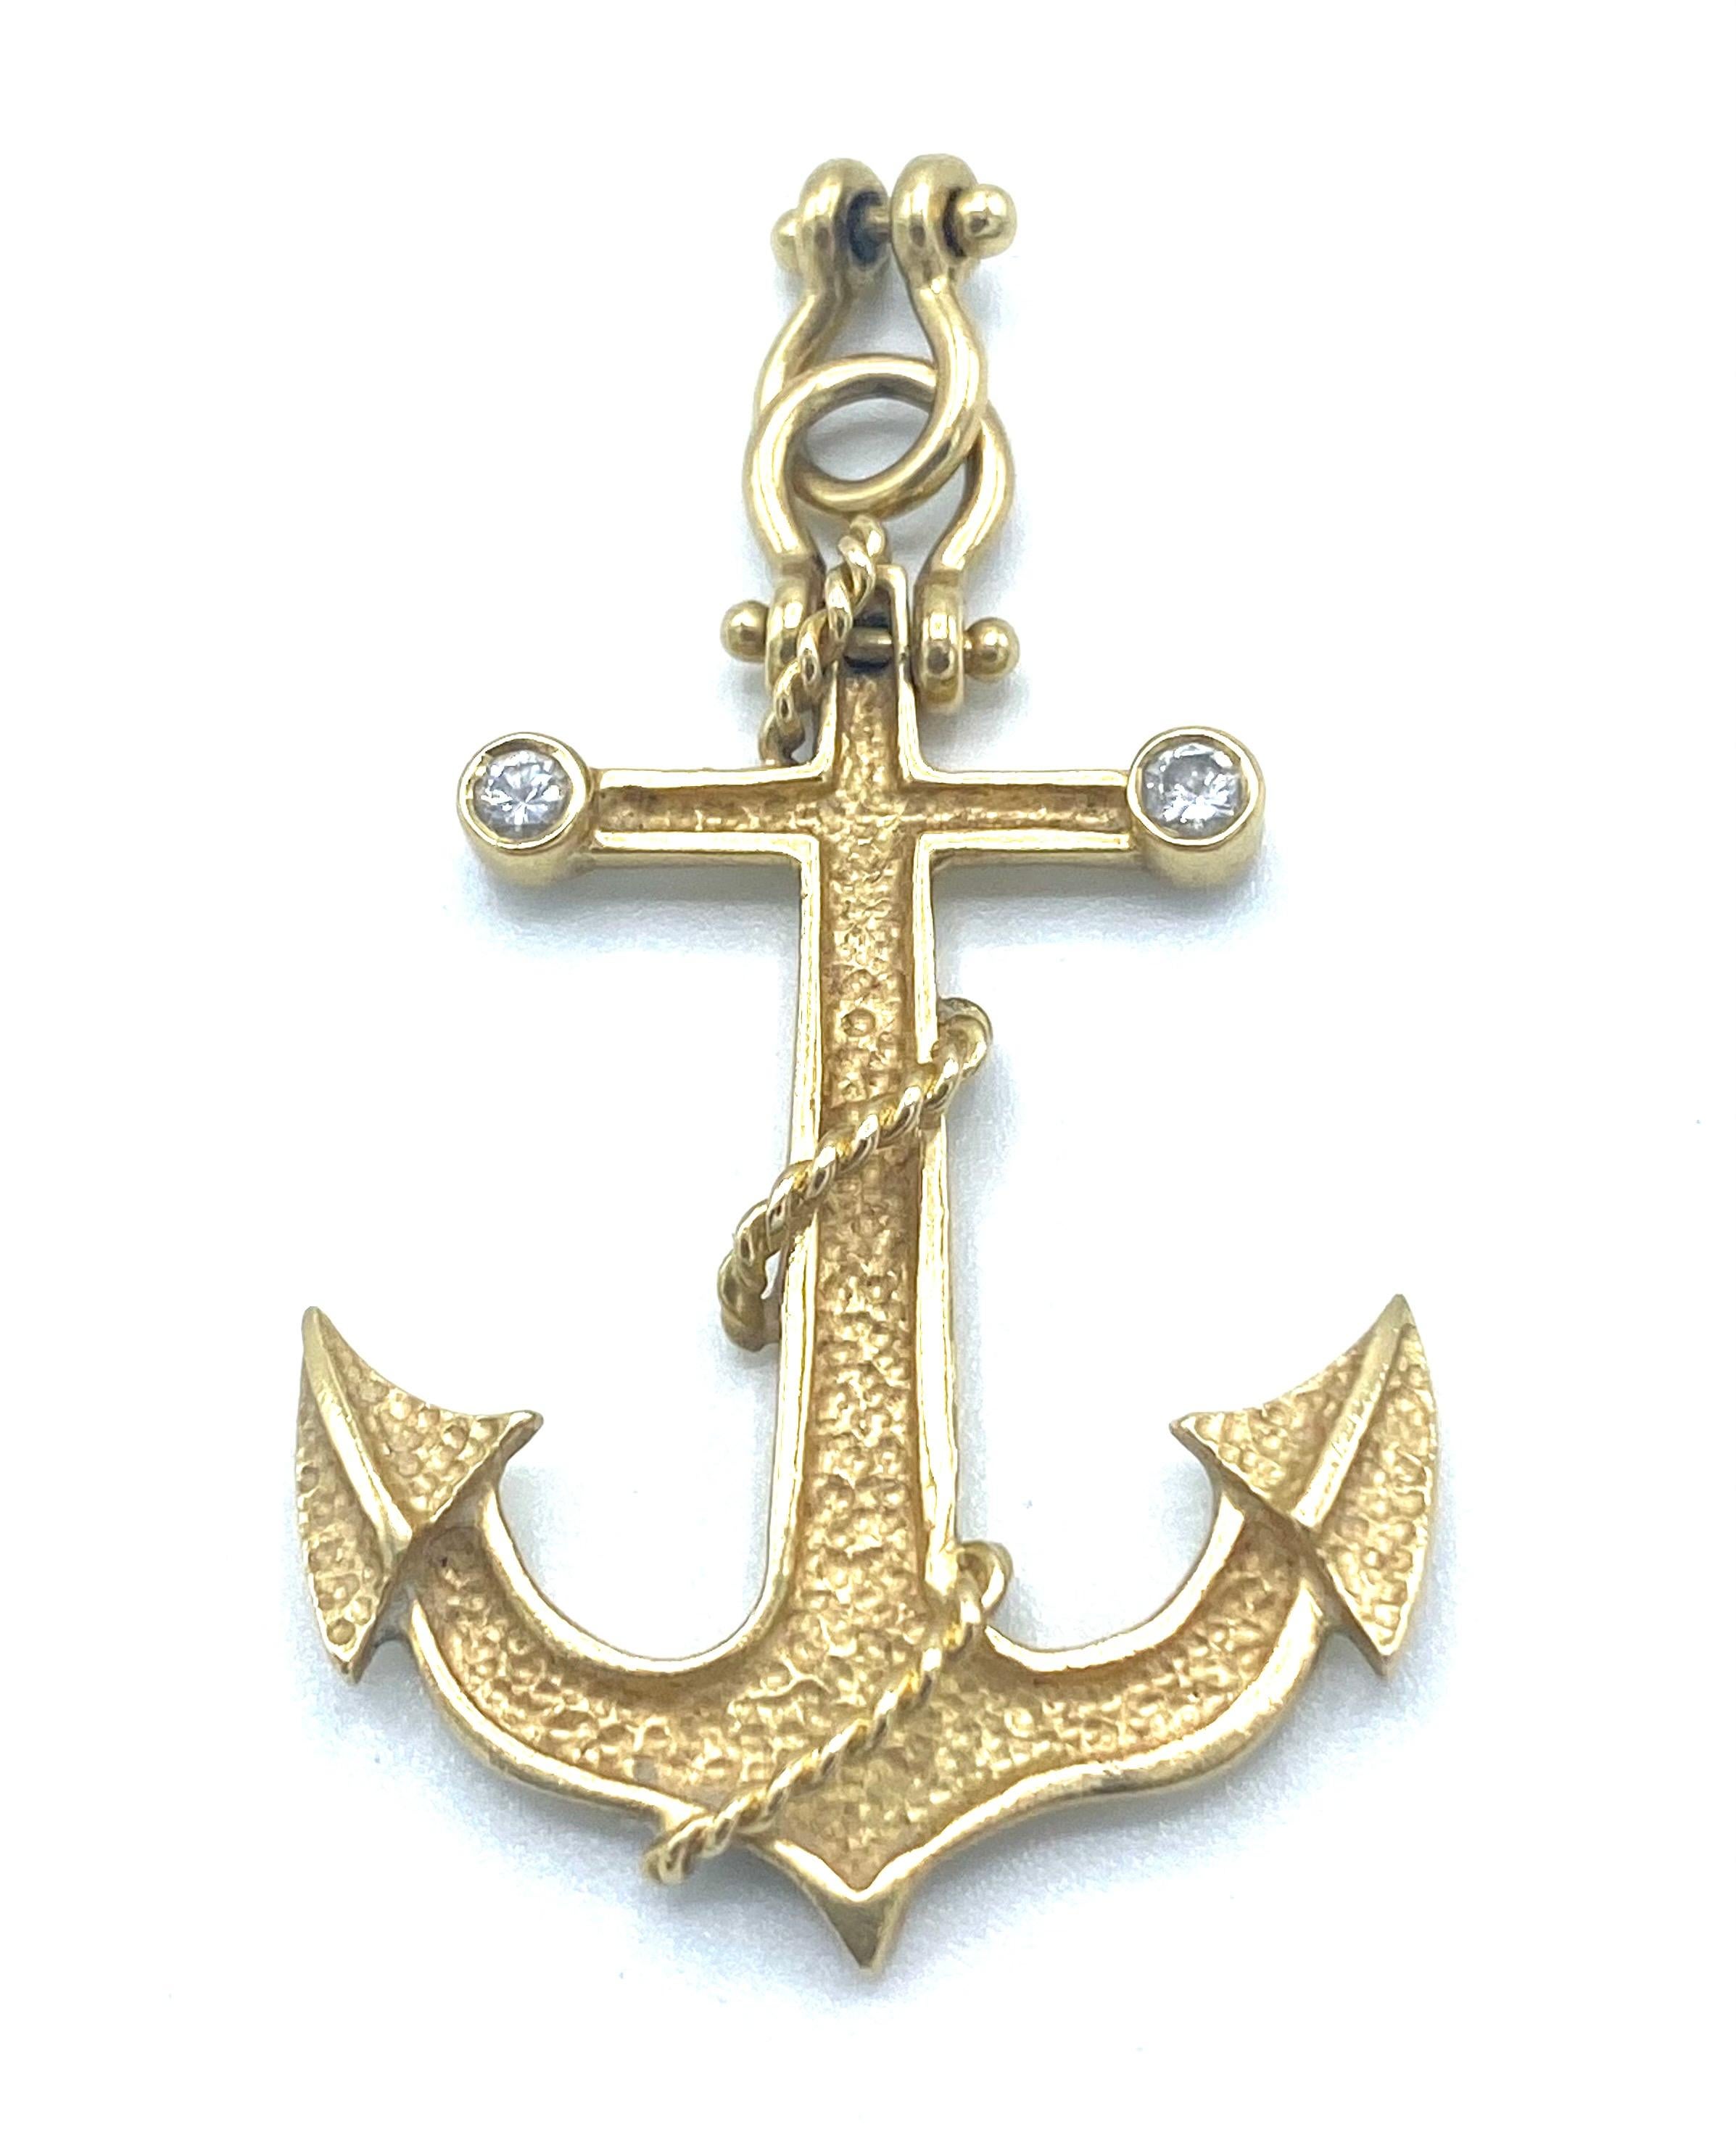 Product details:

The pendant is made out of 18 karat yellow gold and 0.10 cts two round brilliant cut diamonds, featuring nautical and sailor motif. 